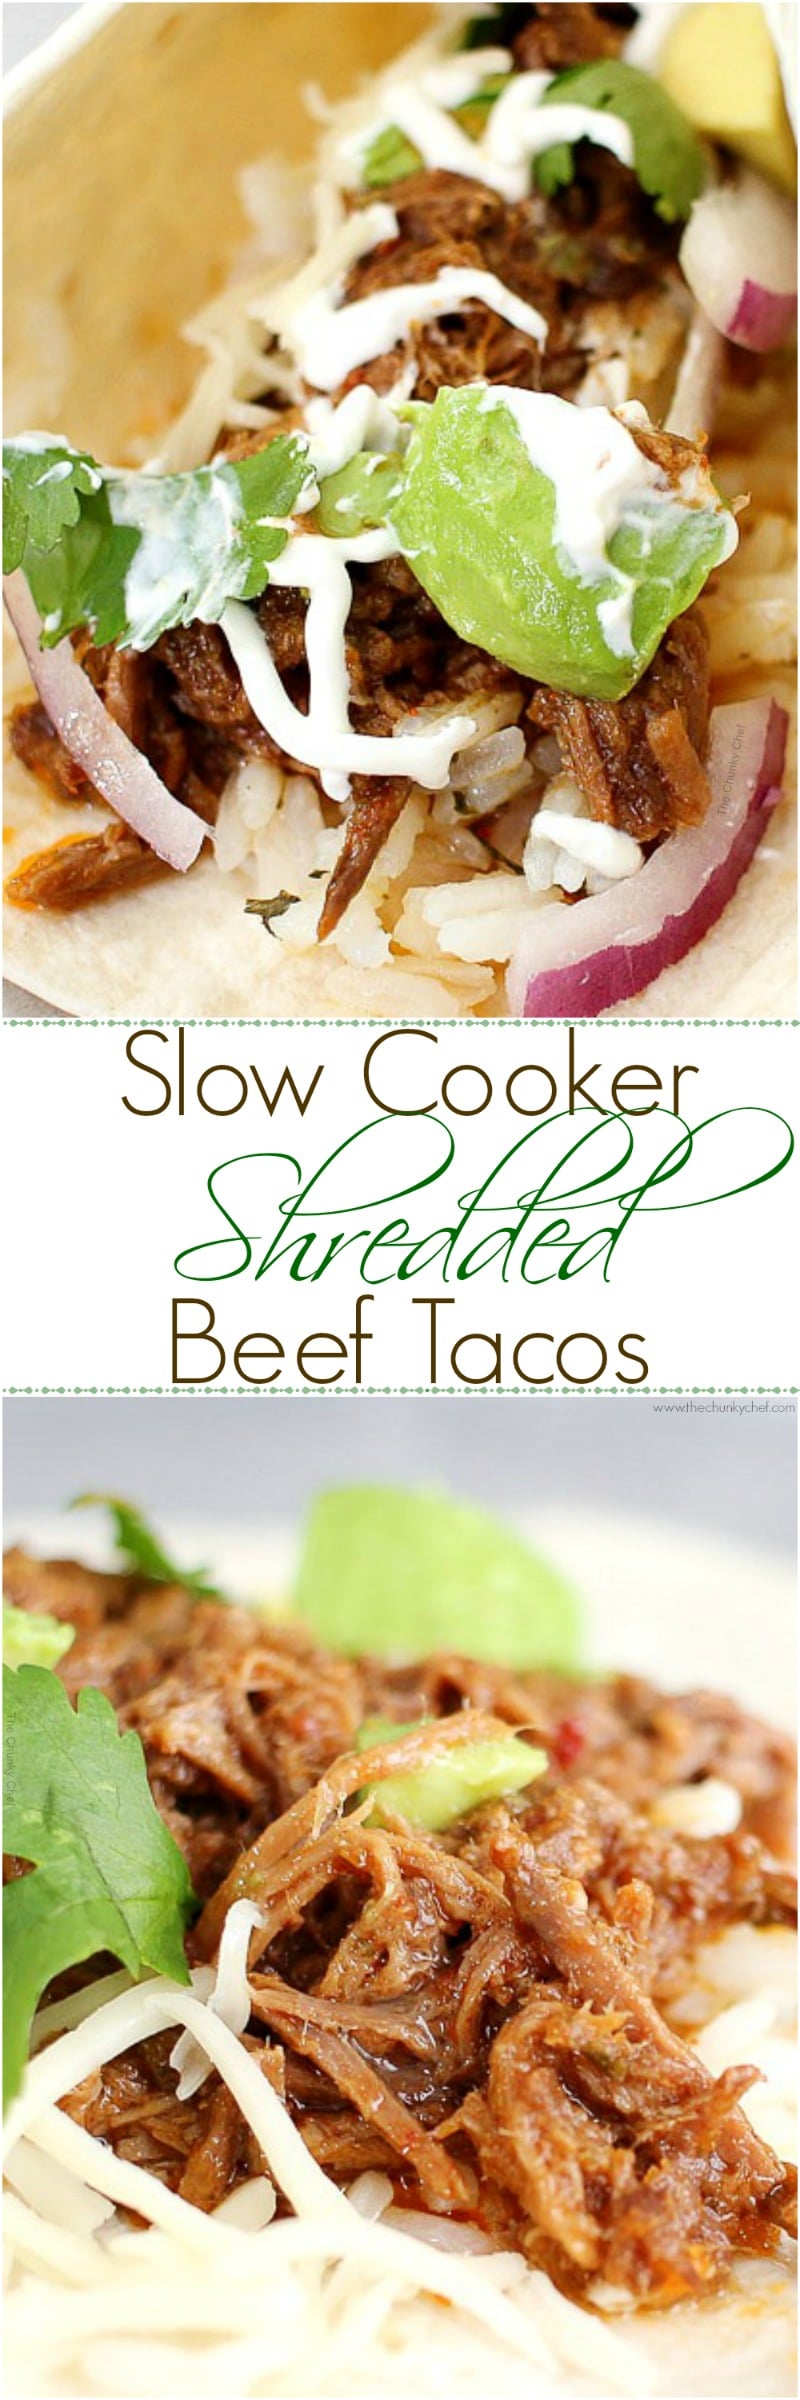 Perfect for Cinco de Mayo or any other occasion... these shredded beef tacos are amazing! The slow cooker makes these so tender and flavorful!